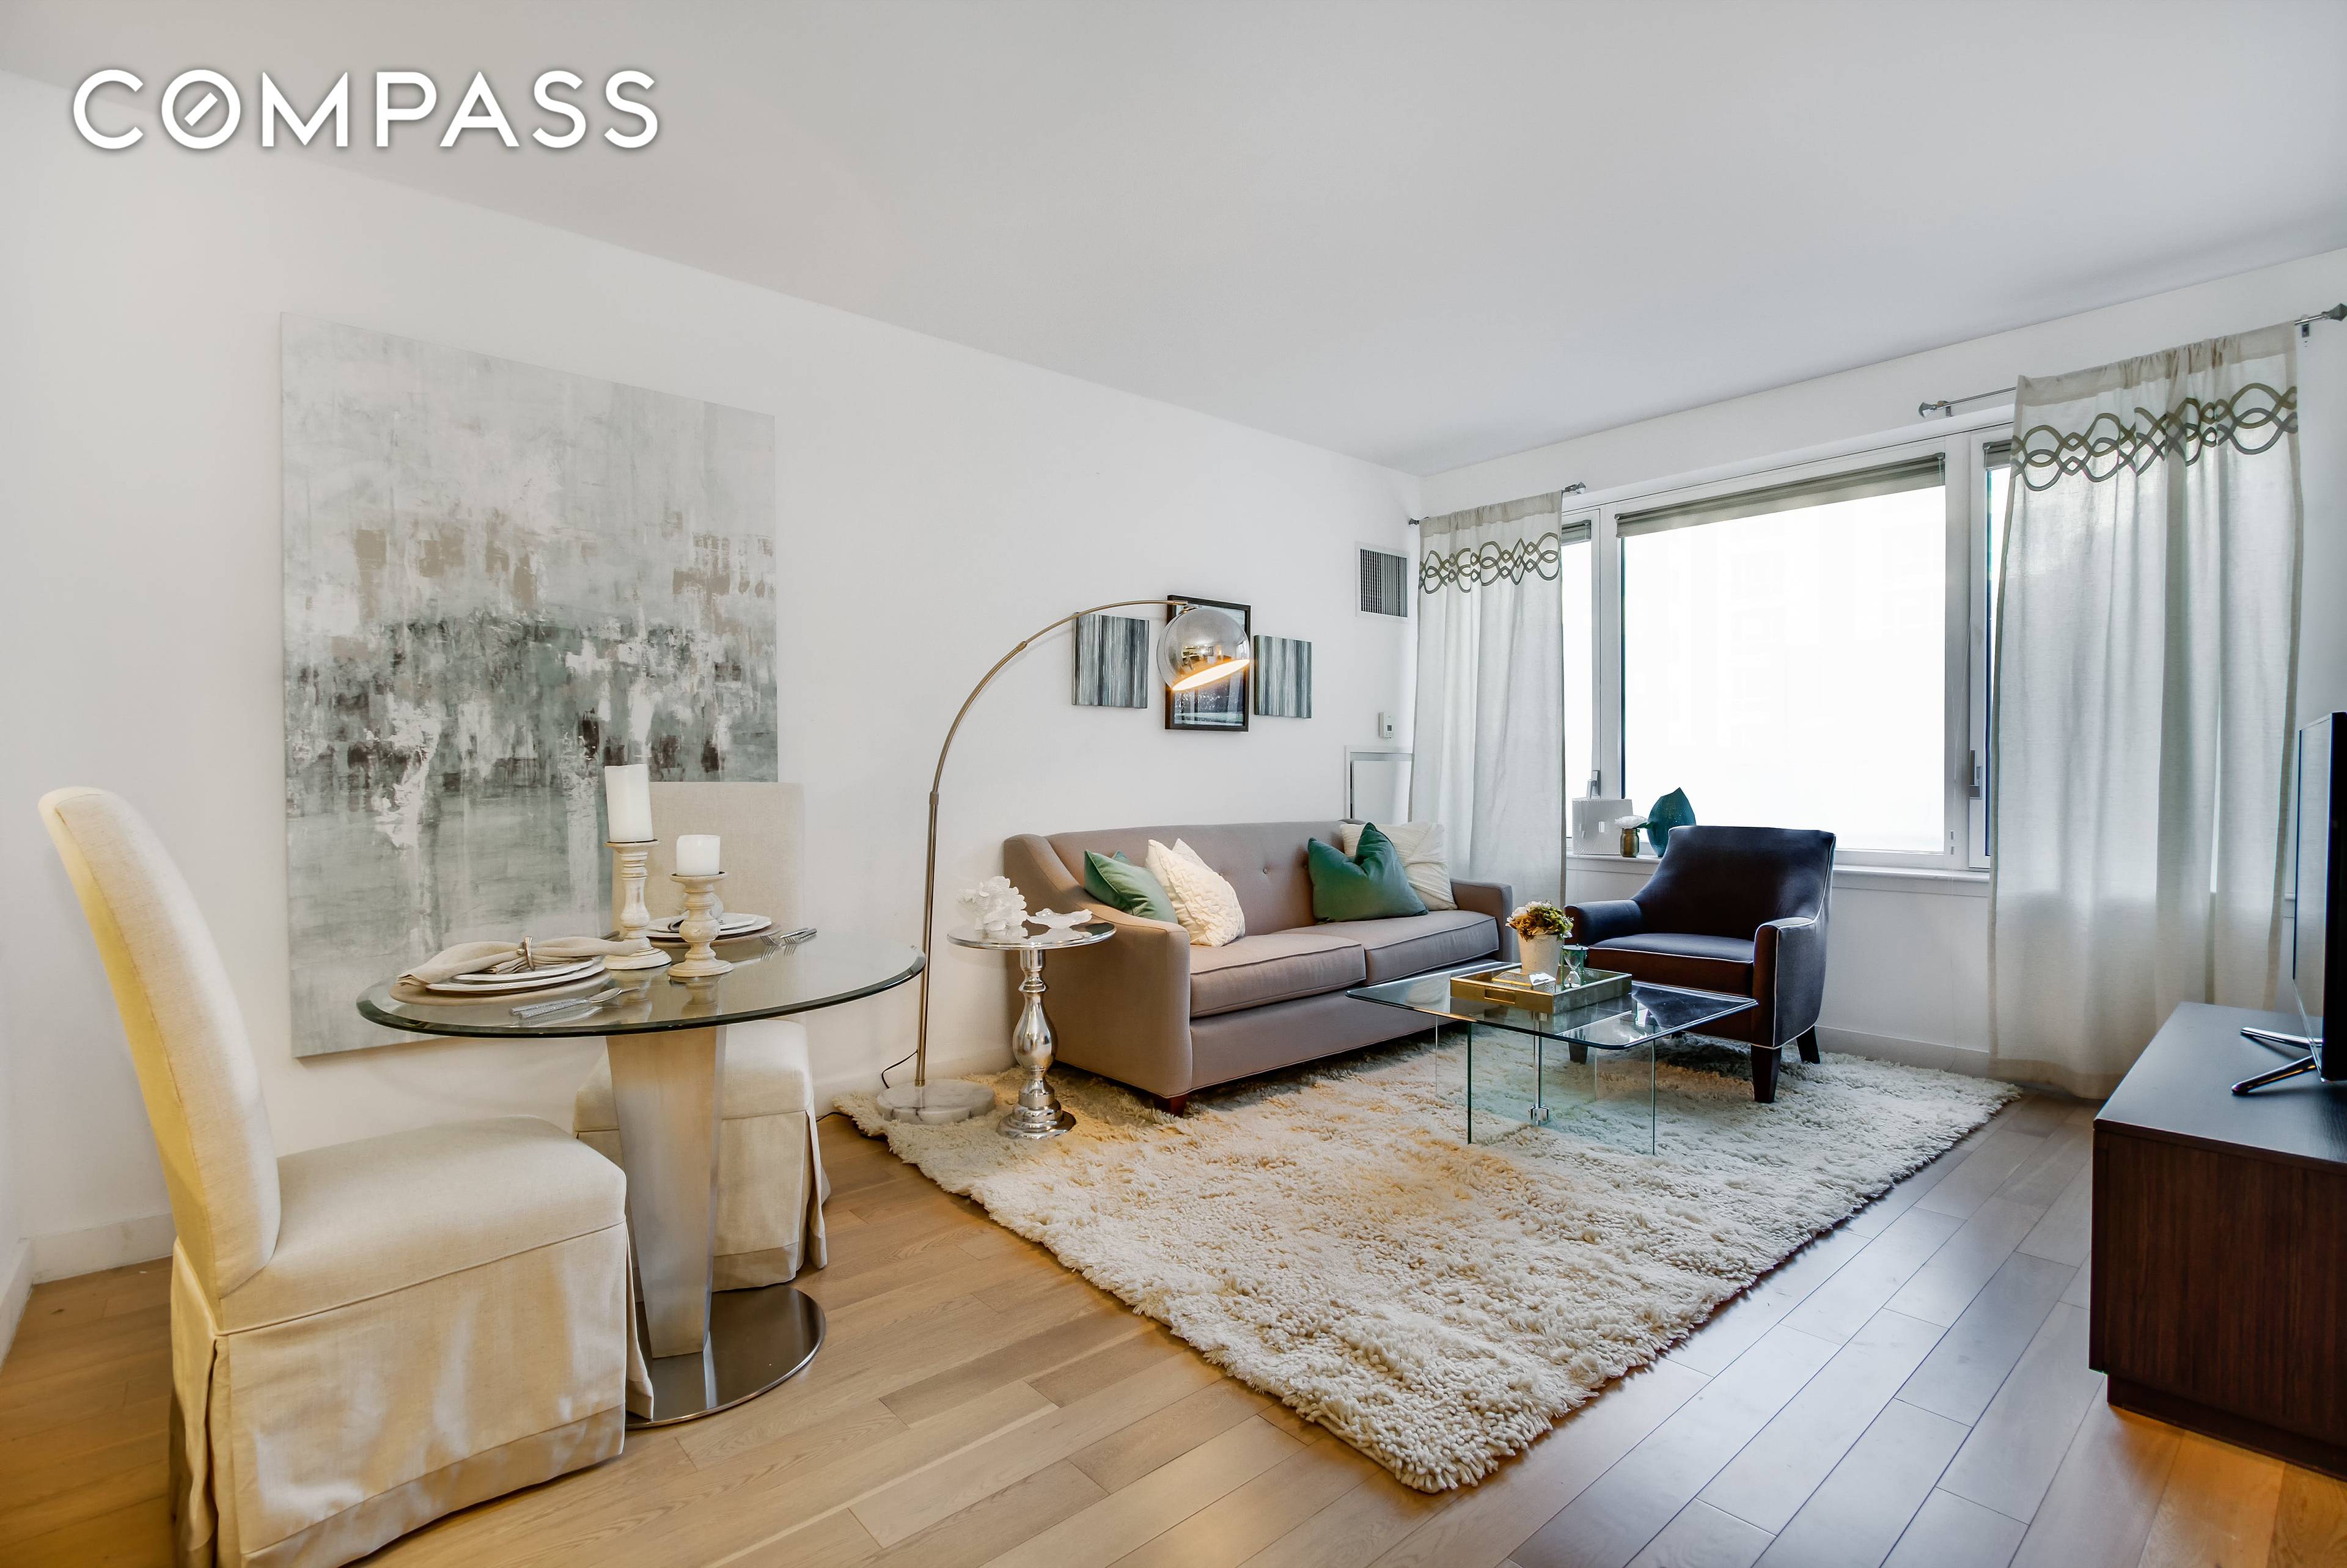 Williamsburg Luxury Large 1BR with State of the Art Chef's Kitchen with Breakfast Bar, Stainless Steel Appliances, M W, and D W, Great Closet Space, Oversized Windows, and Washer Dryer ...